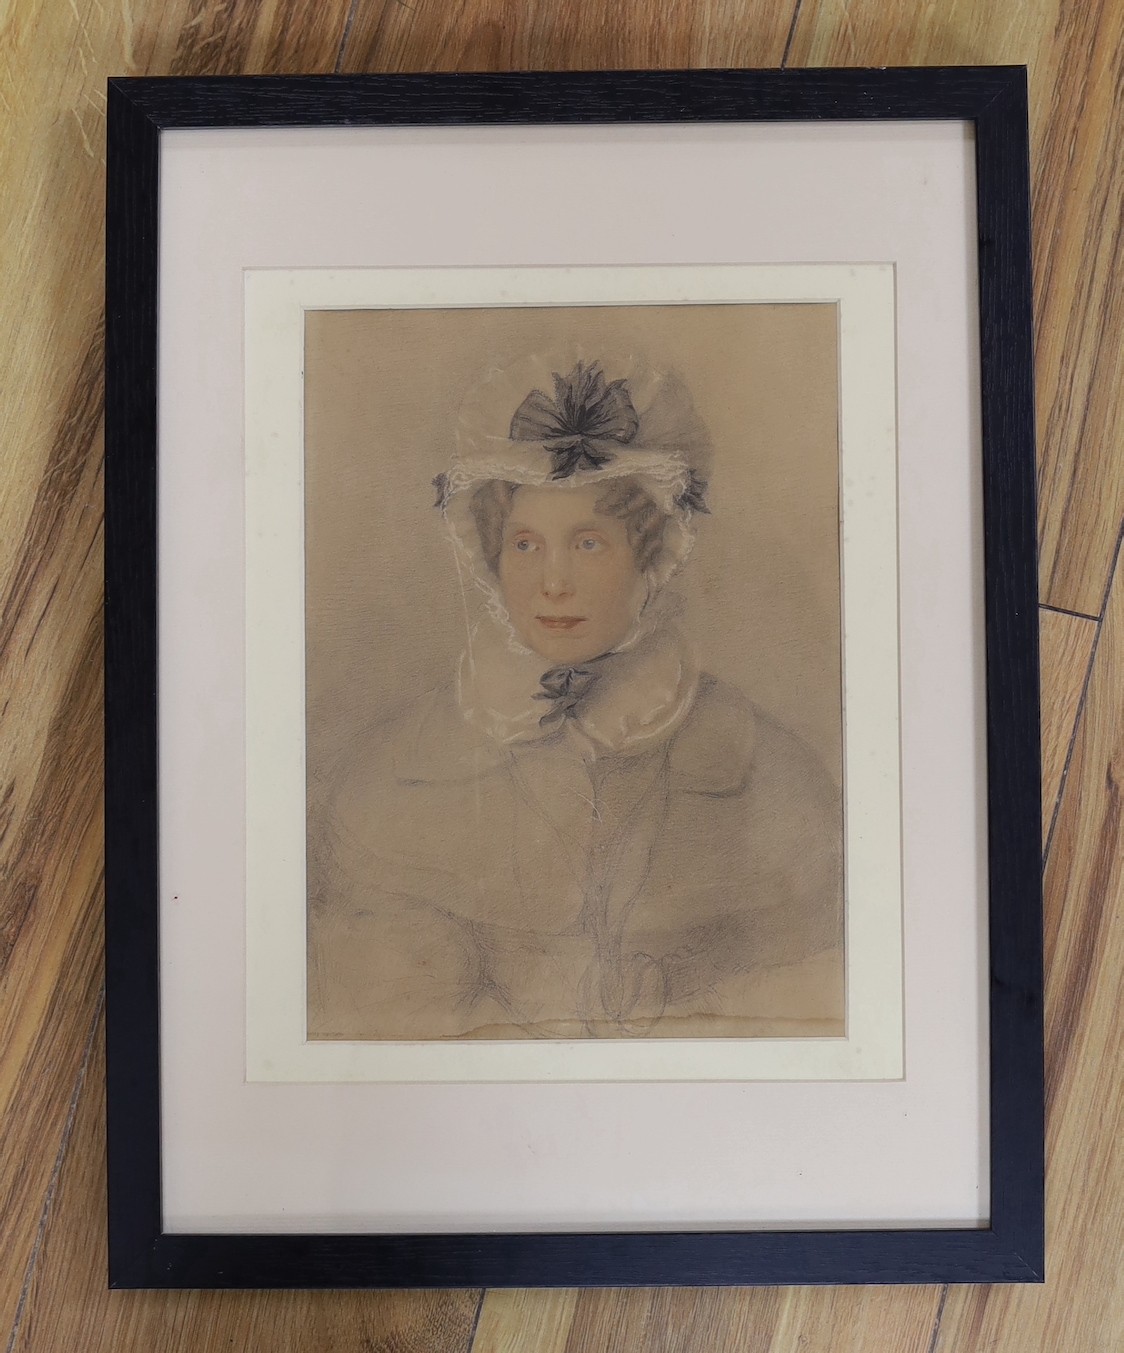 Attributed to George Richmond RA (1809-1896), pencil and watercolour on paper, portrait of a lady in a bonnet, 26 x 19cm